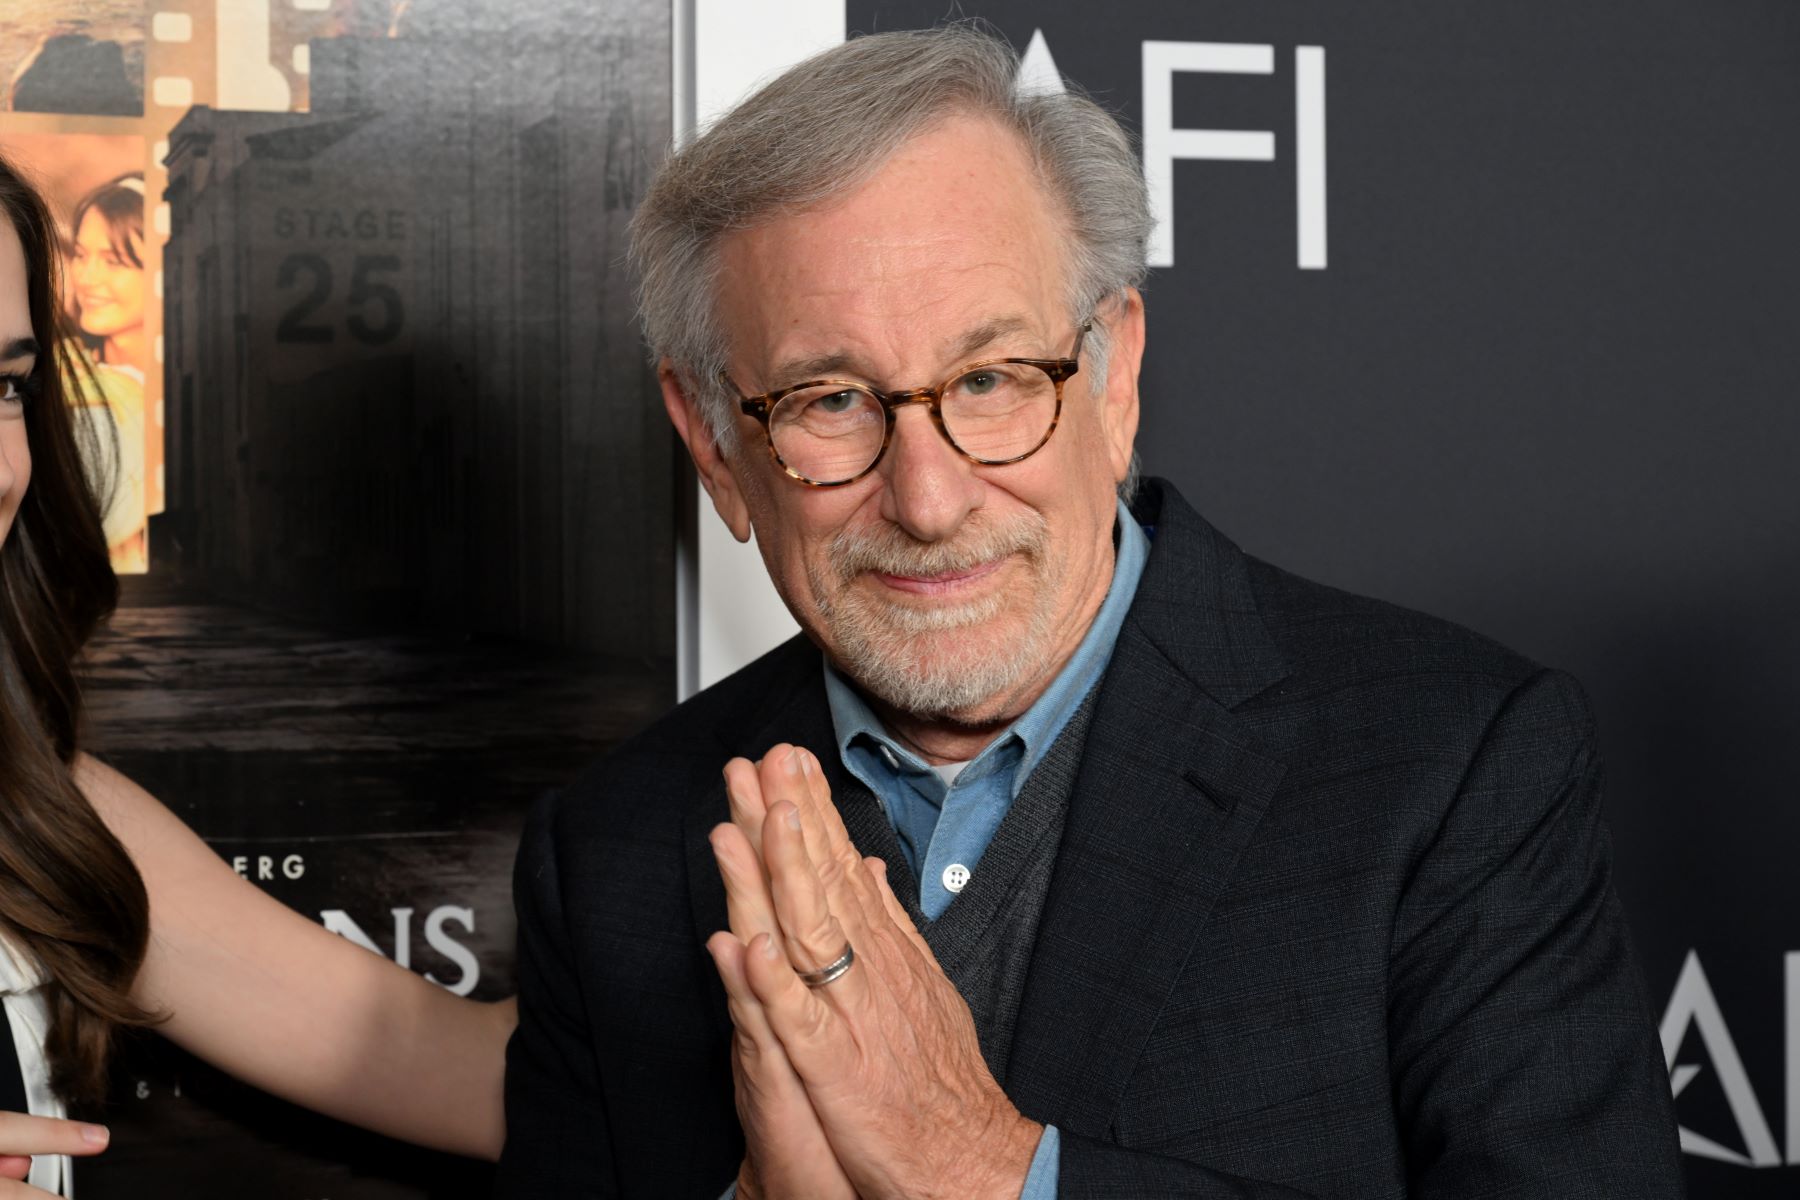 Steven Spielberg attending 'The Fabelmans' premiere at AFI Fest 2022 at the TCL Chinese Theatre in Hollywood